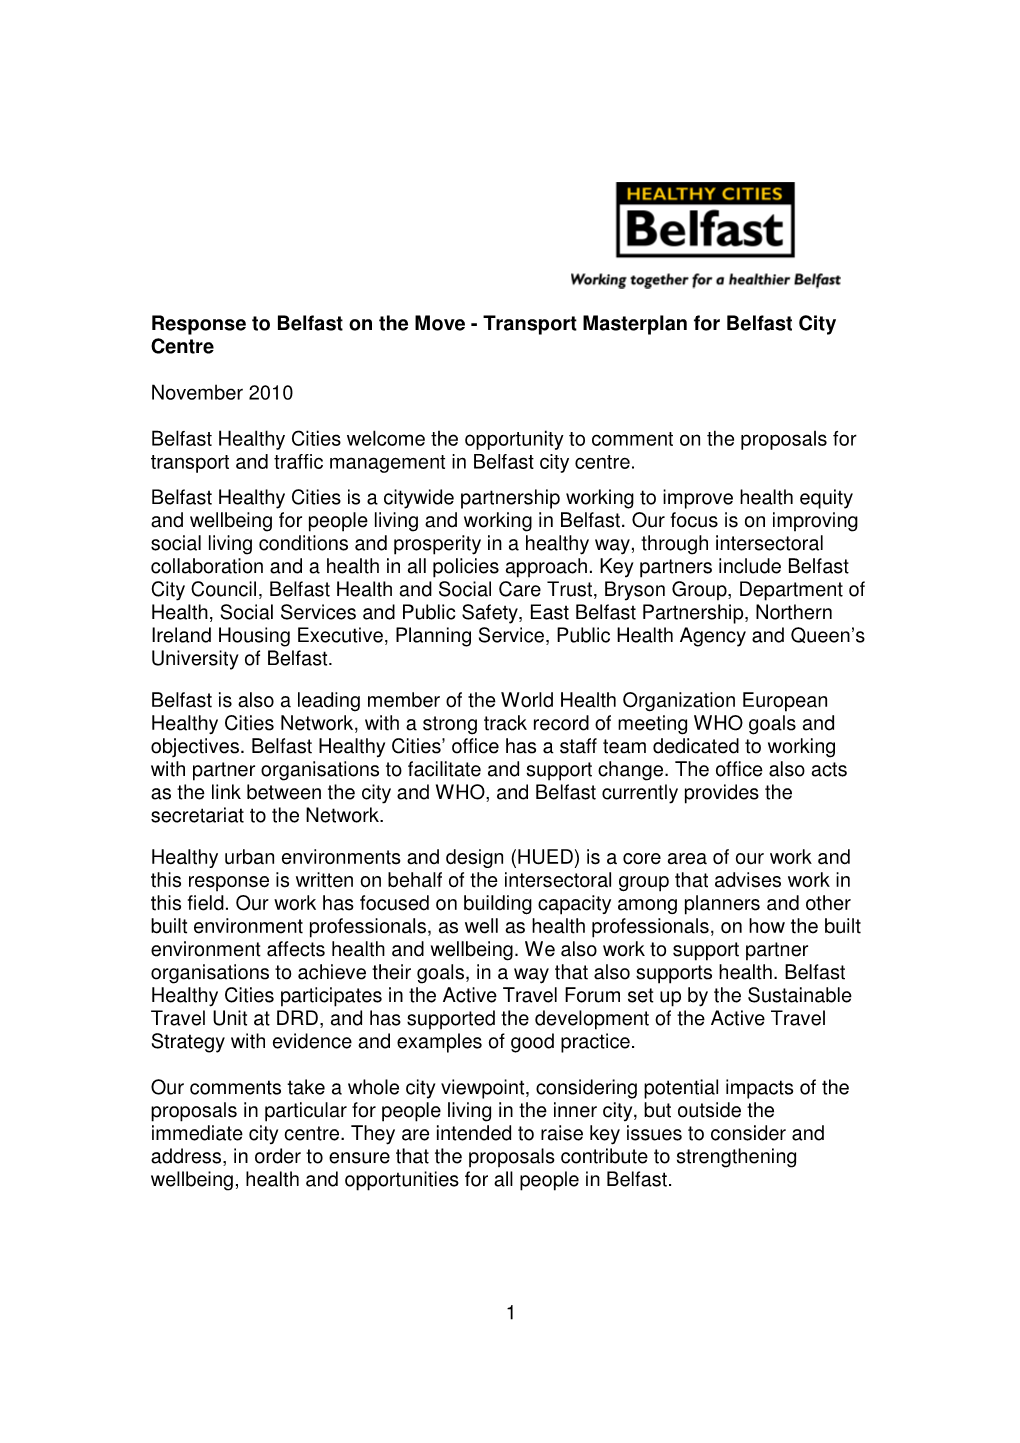 Response to Belfast on the Move - Transport Masterplan for Belfast City Centre